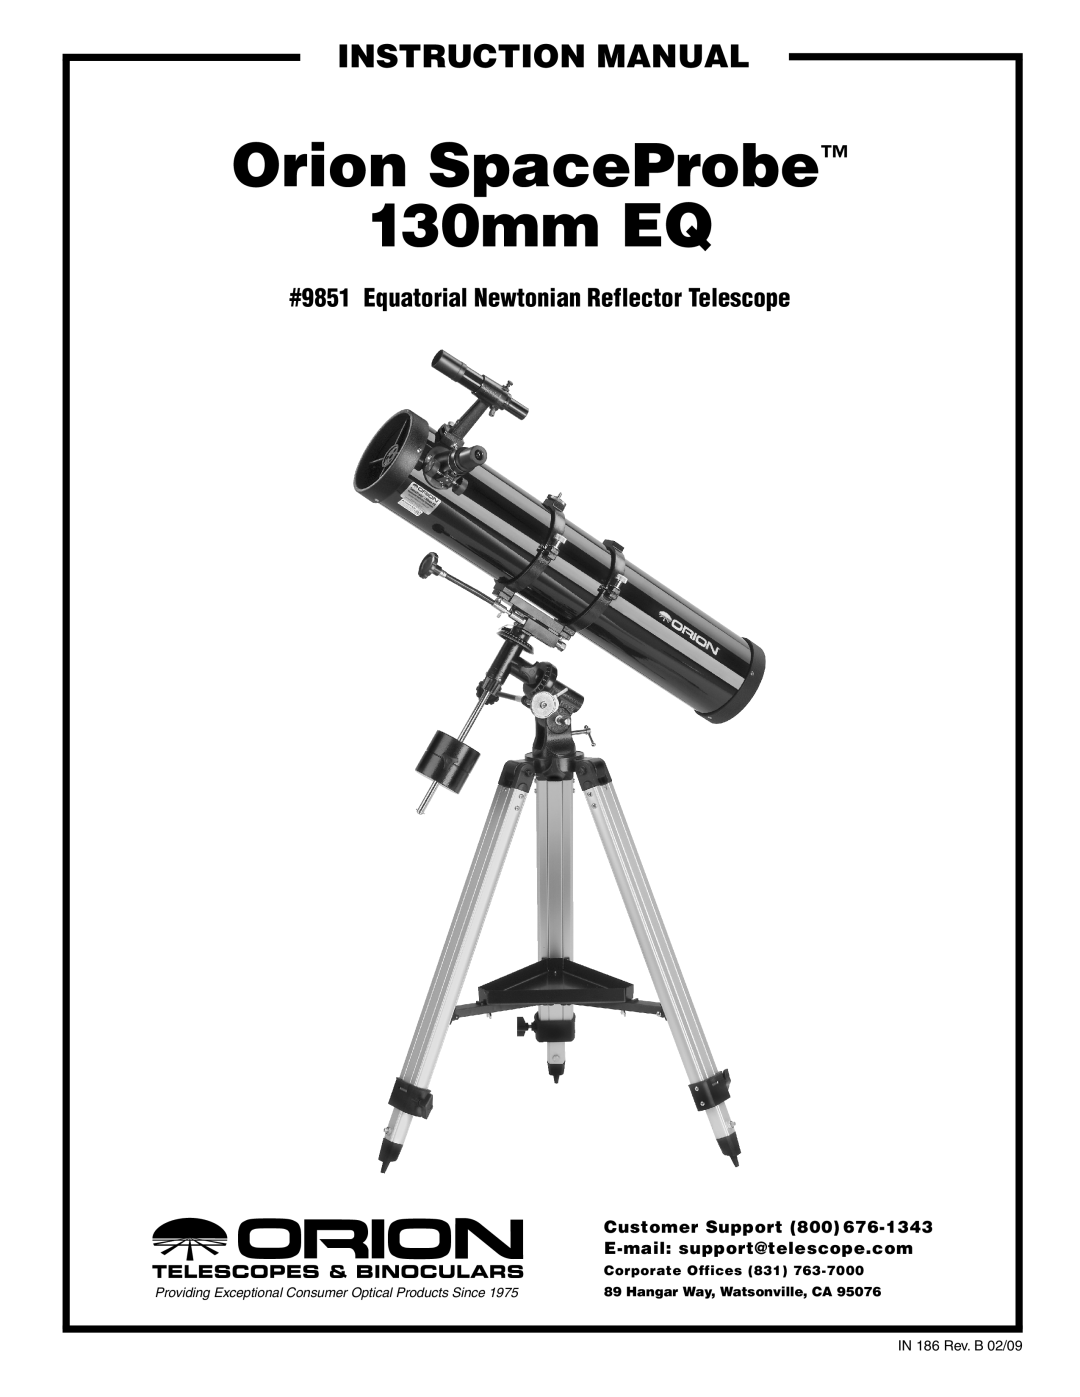 Orion instruction manual #9851, Equatorial Newtonian Reflector Telescope, Customer Support, Orion SpaceProbe, 130mm EQ 